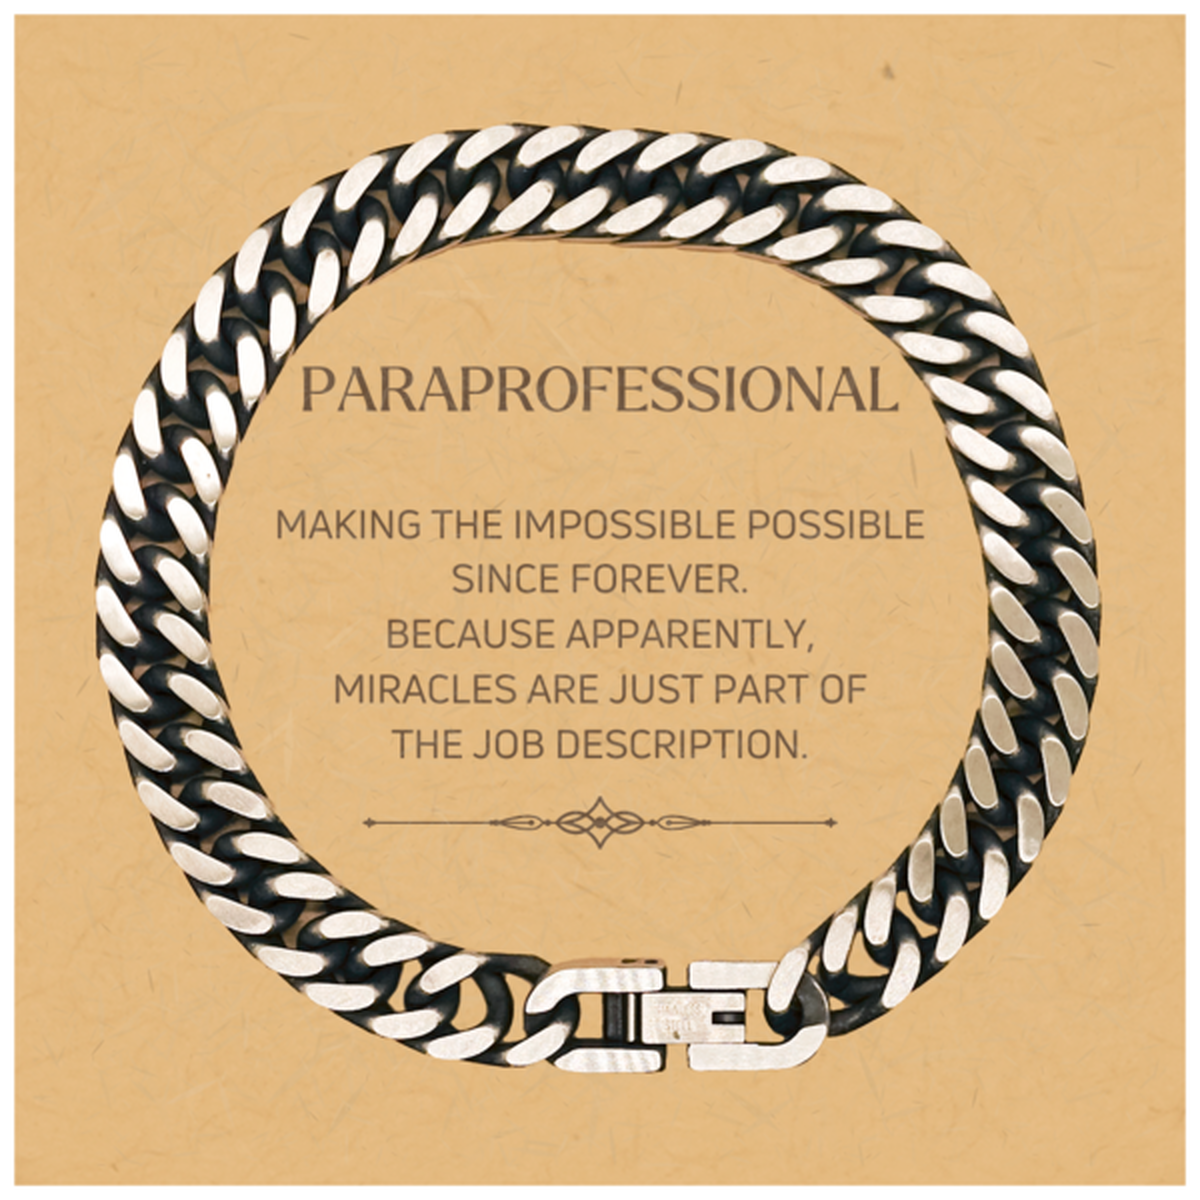 Funny Paraprofessional Gifts, Miracles are just part of the job description, Inspirational Birthday Christmas Cuban Link Chain Bracelet For Paraprofessional, Men, Women, Coworkers, Friends, Boss